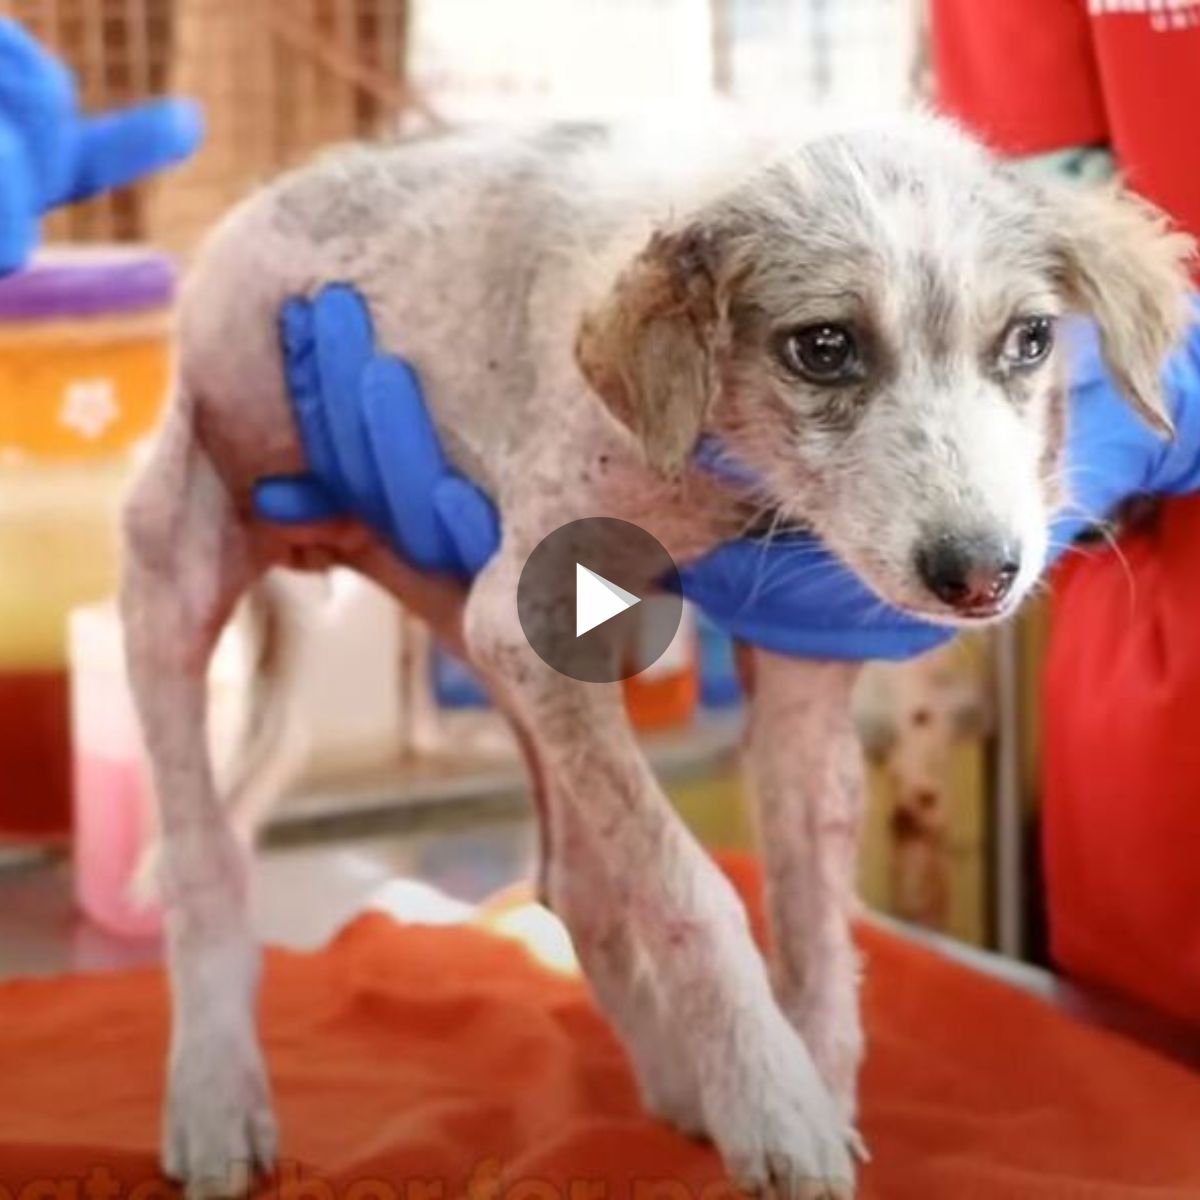 Chilling in Pain: A Pitiful Puppy Trembling in Agony, Injured and Severely Afflicted with Skin Ulcers, Desperately in Need of Assistance.